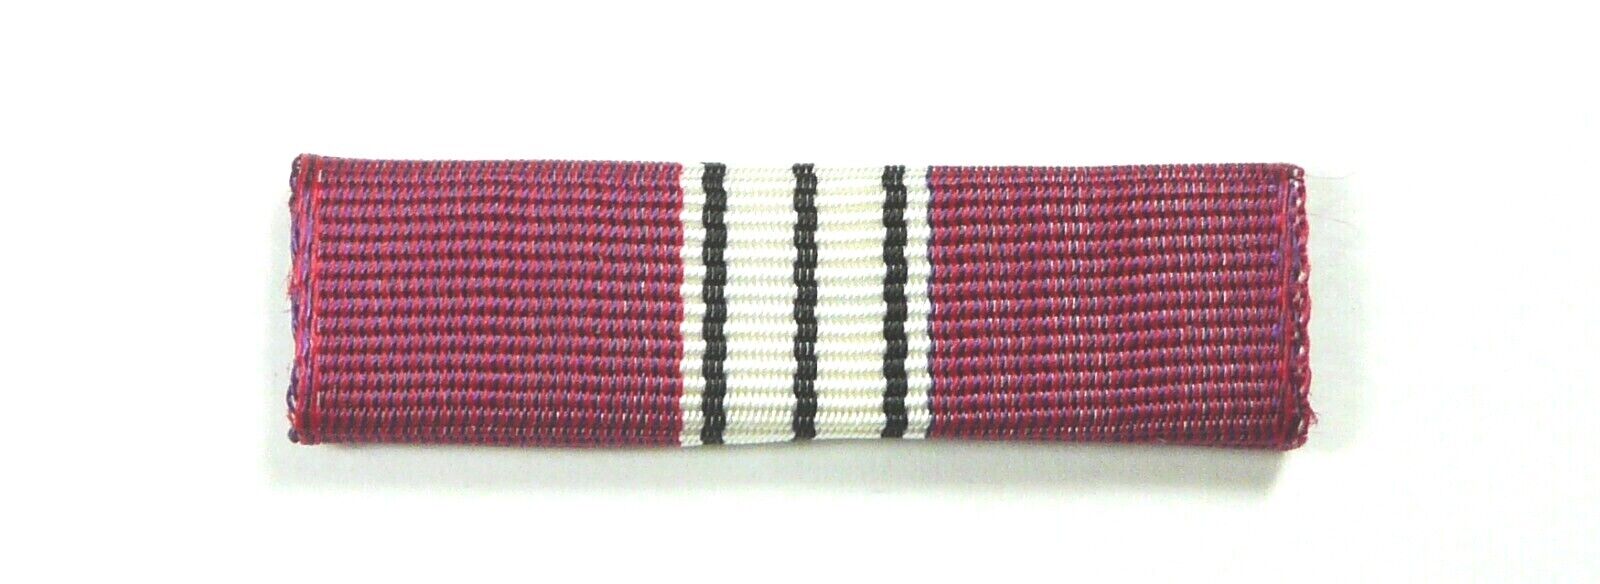 US Department of State Superior Honor Award Medal service ribbon